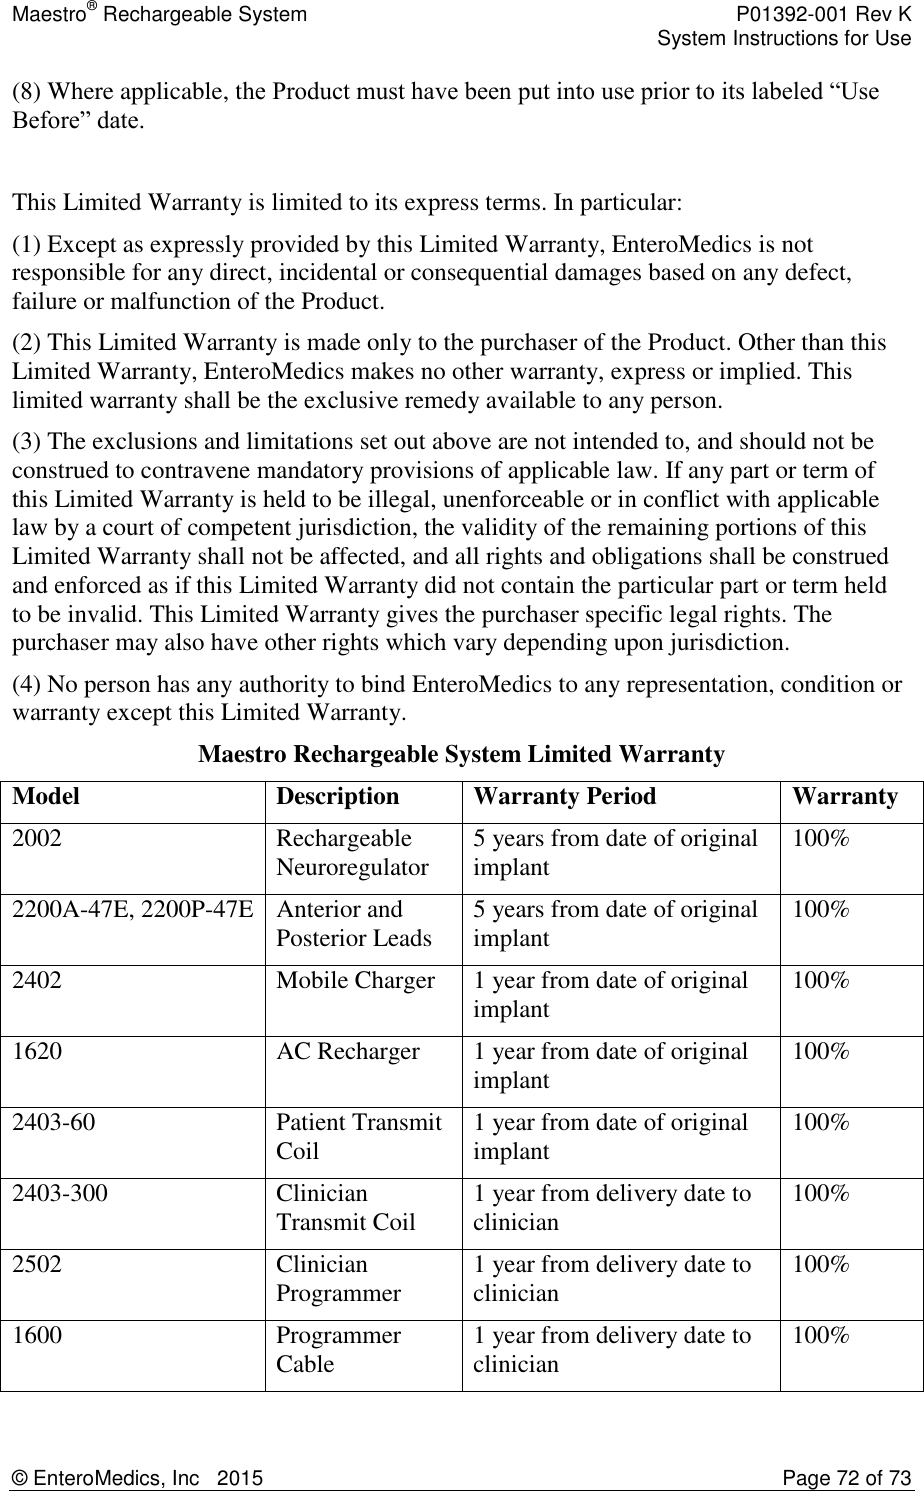 Maestro® Rechargeable System    P01392-001 Rev K     System Instructions for Use  © EnteroMedics, Inc   2015  Page 72 of 73  (8) Where applicable, the Product must have been put into use prior to its labeled “Use Before” date.  This Limited Warranty is limited to its express terms. In particular: (1) Except as expressly provided by this Limited Warranty, EnteroMedics is not responsible for any direct, incidental or consequential damages based on any defect, failure or malfunction of the Product. (2) This Limited Warranty is made only to the purchaser of the Product. Other than this Limited Warranty, EnteroMedics makes no other warranty, express or implied. This limited warranty shall be the exclusive remedy available to any person.  (3) The exclusions and limitations set out above are not intended to, and should not be construed to contravene mandatory provisions of applicable law. If any part or term of this Limited Warranty is held to be illegal, unenforceable or in conflict with applicable law by a court of competent jurisdiction, the validity of the remaining portions of this Limited Warranty shall not be affected, and all rights and obligations shall be construed and enforced as if this Limited Warranty did not contain the particular part or term held to be invalid. This Limited Warranty gives the purchaser specific legal rights. The purchaser may also have other rights which vary depending upon jurisdiction. (4) No person has any authority to bind EnteroMedics to any representation, condition or warranty except this Limited Warranty. Maestro Rechargeable System Limited Warranty Model Description Warranty Period Warranty 2002 Rechargeable Neuroregulator 5 years from date of original implant 100%  2200A-47E, 2200P-47E Anterior and Posterior Leads 5 years from date of original implant 100% 2402 Mobile Charger 1 year from date of original implant 100% 1620 AC Recharger 1 year from date of original implant 100% 2403-60 Patient Transmit Coil 1 year from date of original implant 100% 2403-300 Clinician Transmit Coil 1 year from delivery date to clinician 100% 2502 Clinician Programmer 1 year from delivery date to clinician 100% 1600 Programmer Cable 1 year from delivery date to clinician 100%  